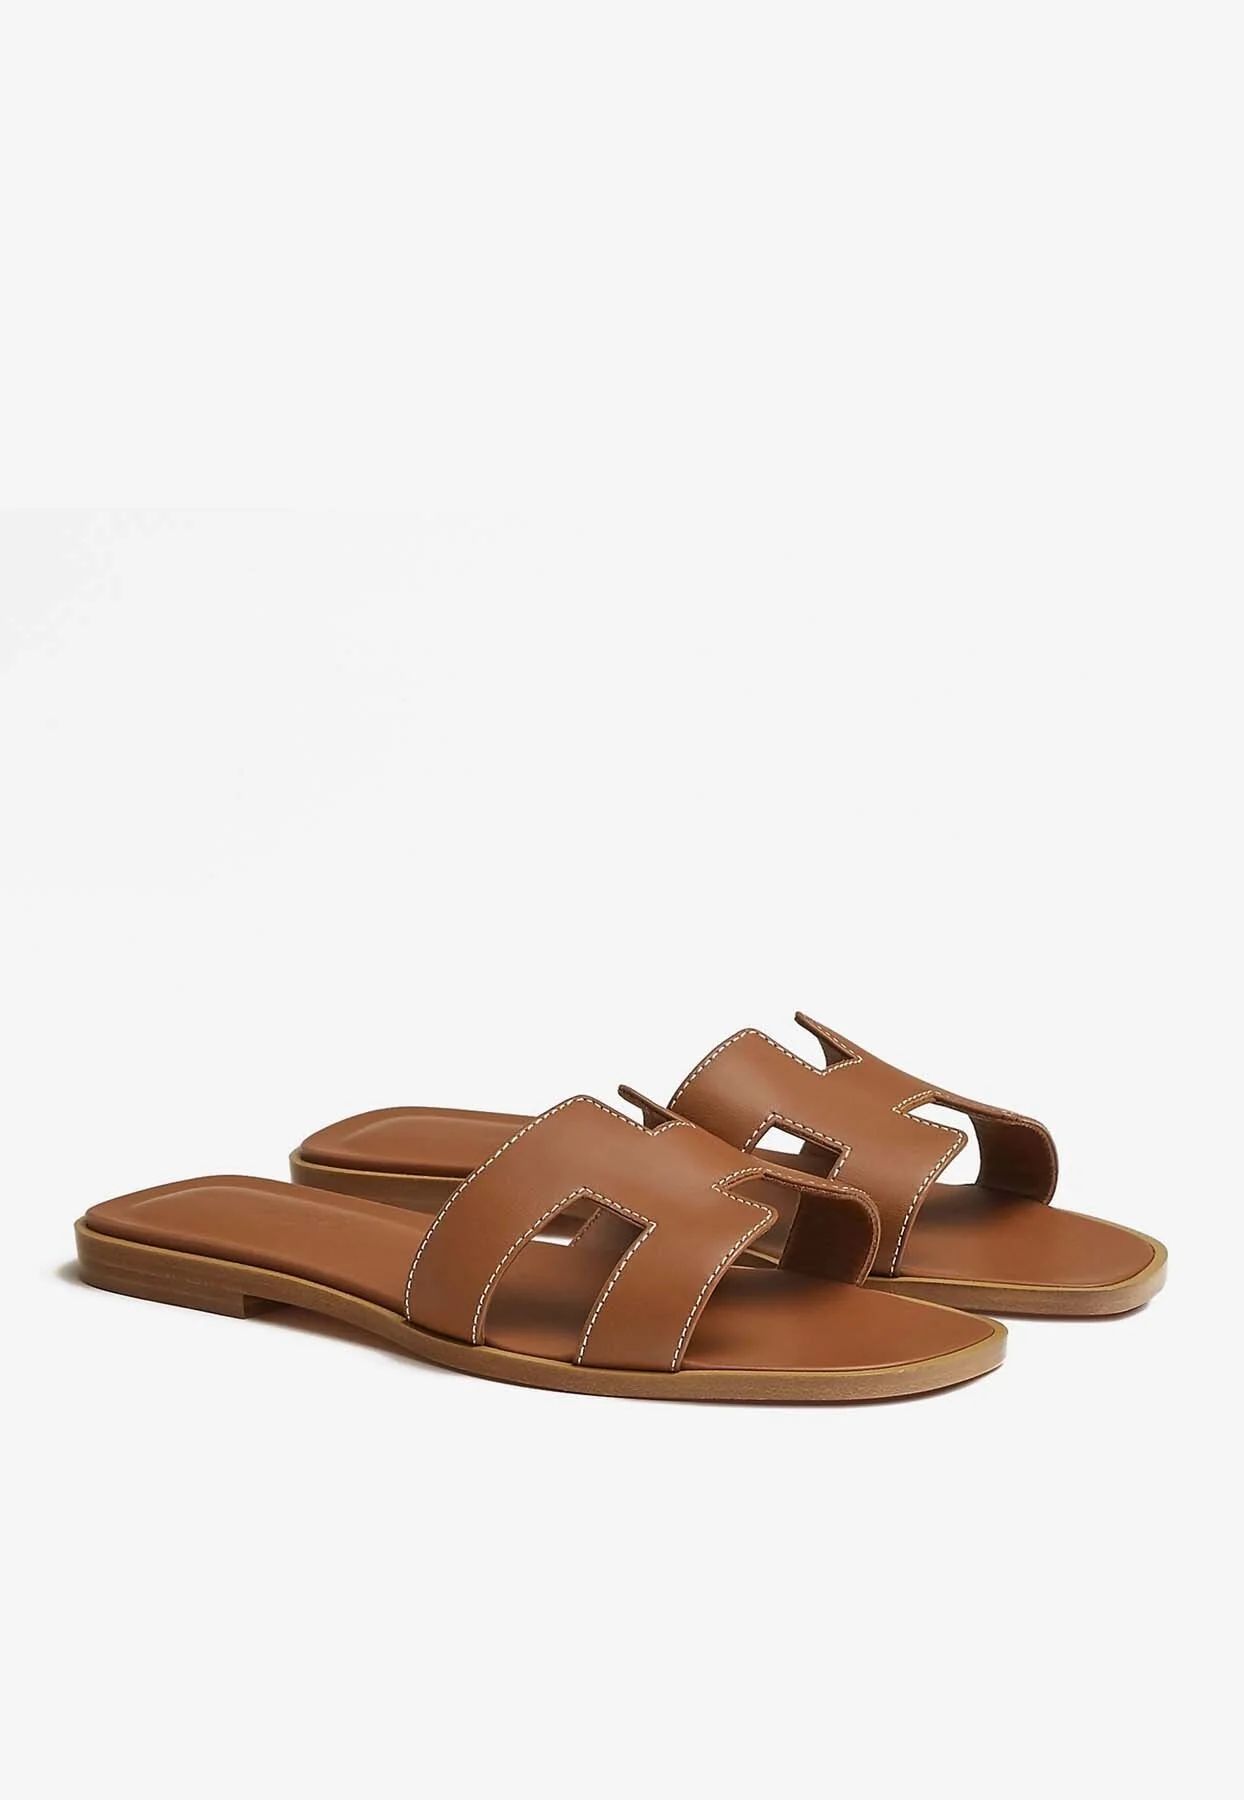 Oran H Cut-Out Sandals in Calf Leather | Thahab